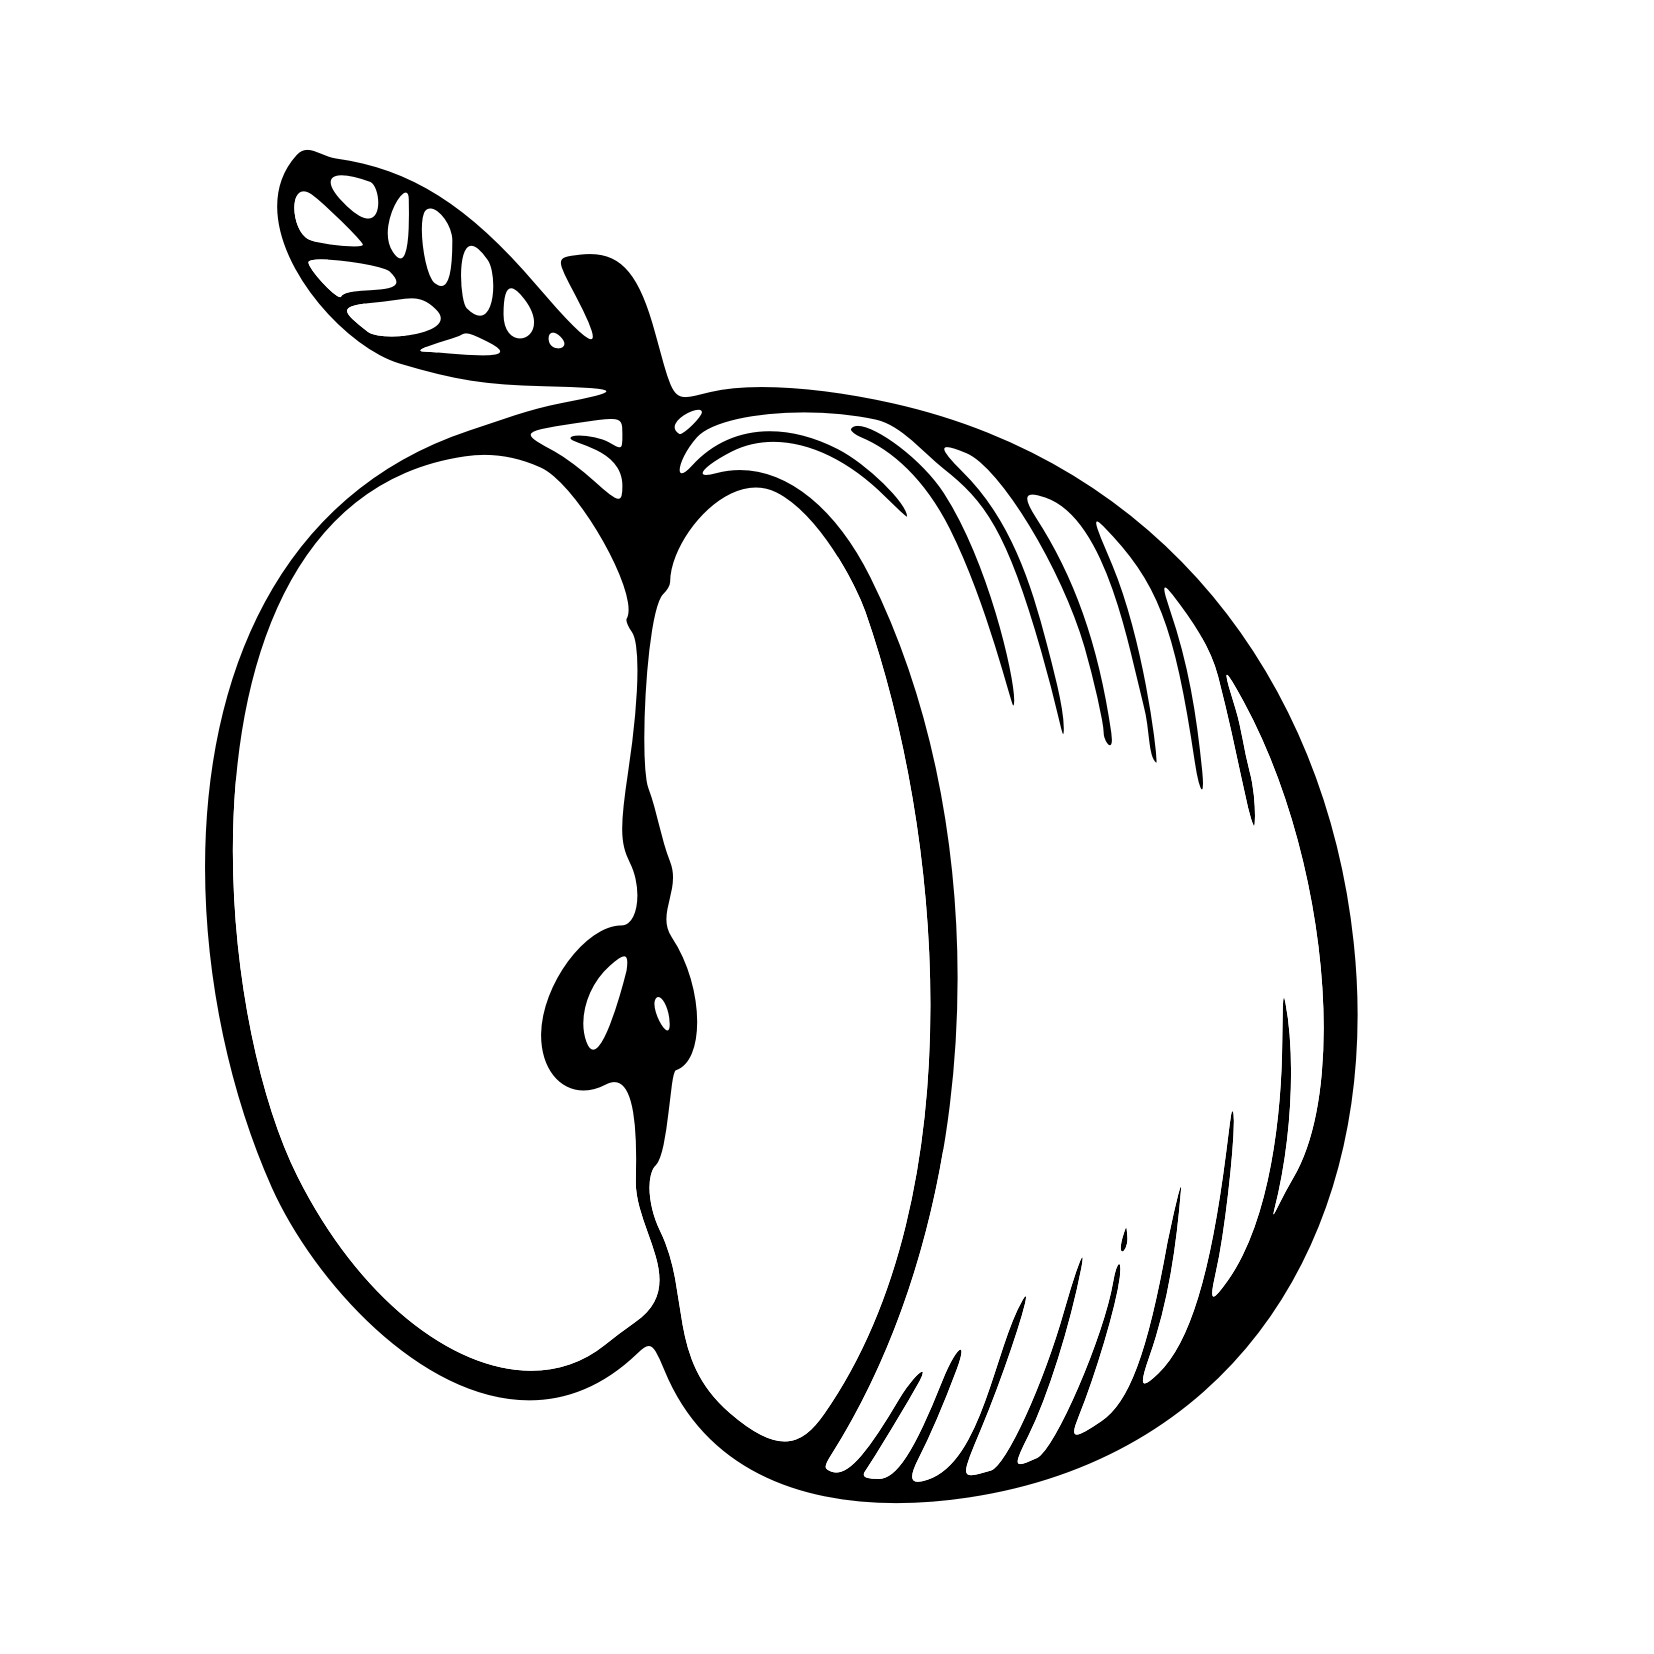 coloring page of an apple apple line drawing at getdrawingscom free for personal an page of coloring apple 